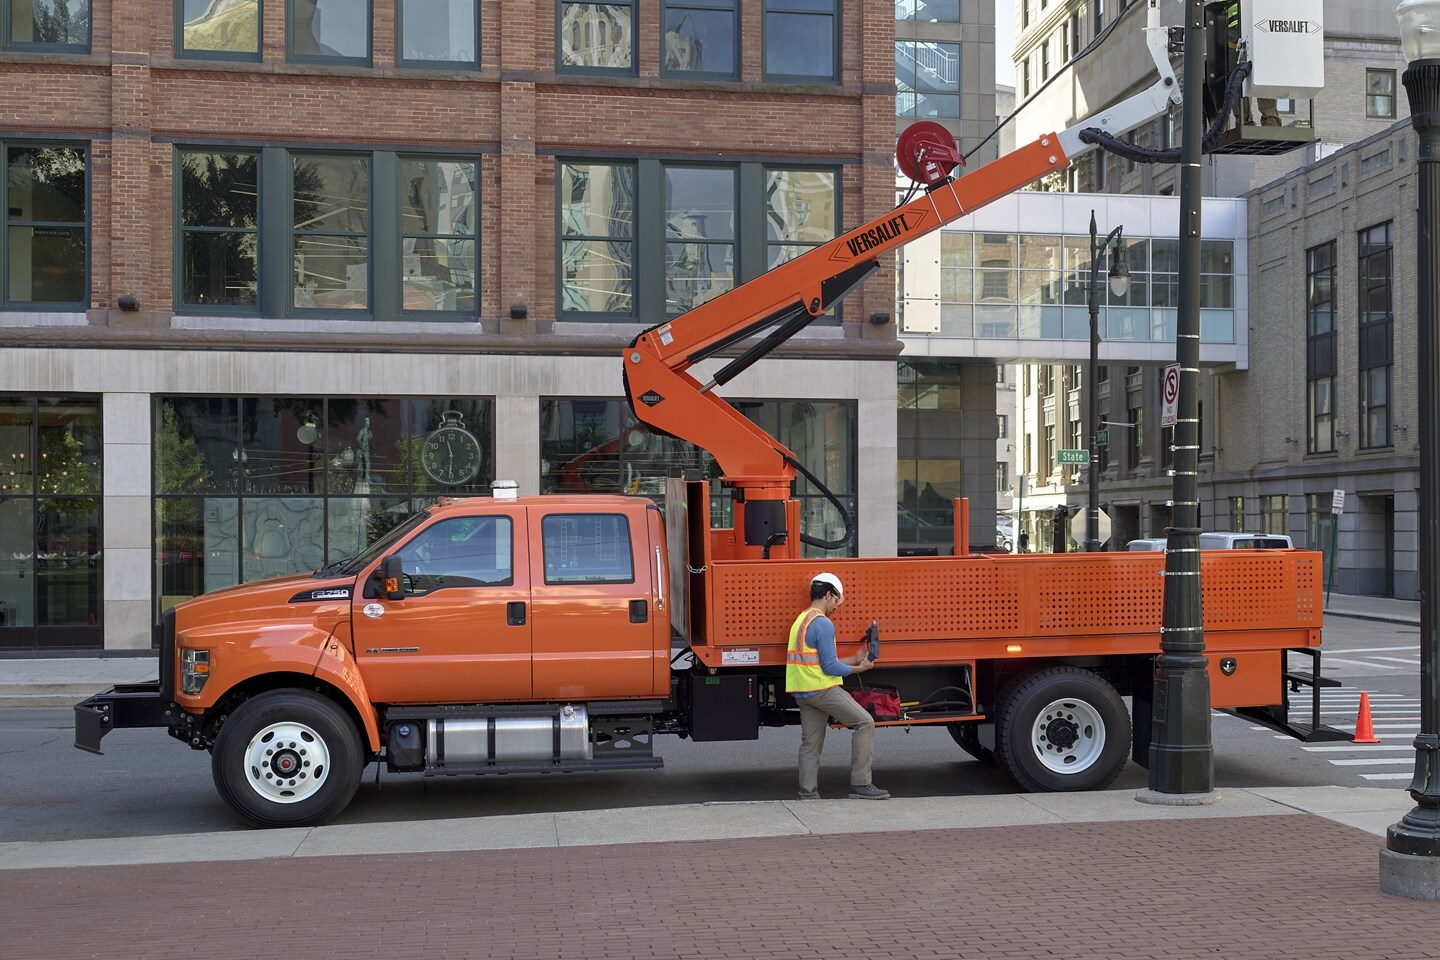 2024 Orange Ford F-750 Crew Cab Crane Truck being used to fix a city light post